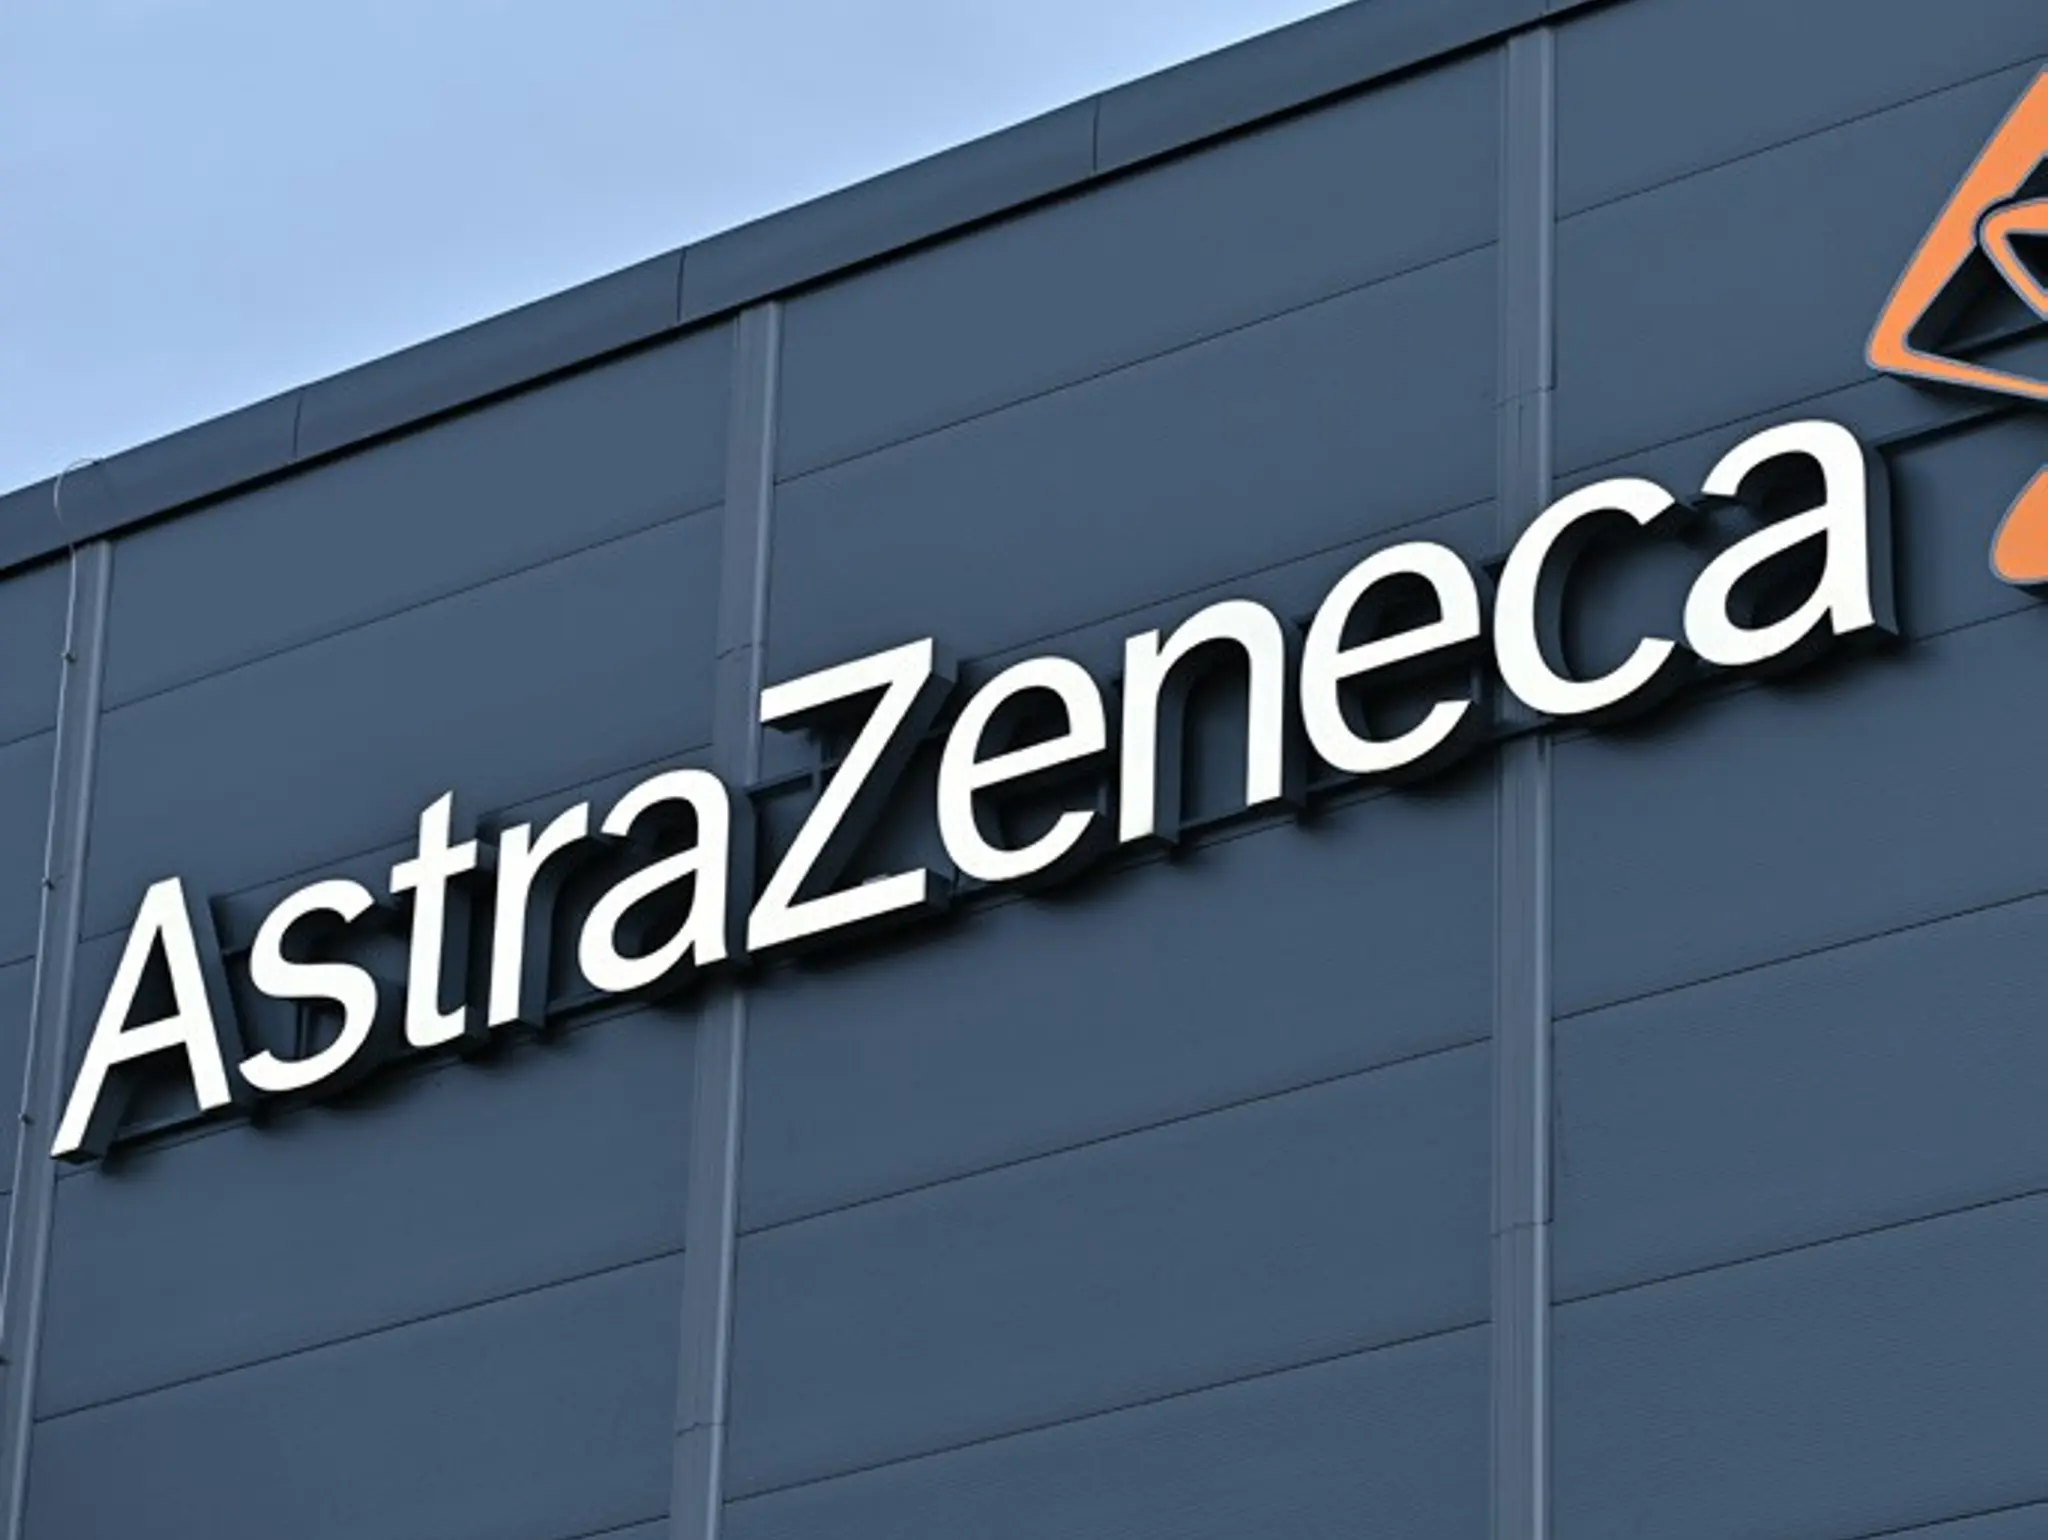 AstraZeneca shares positive results from Imfinzi trial